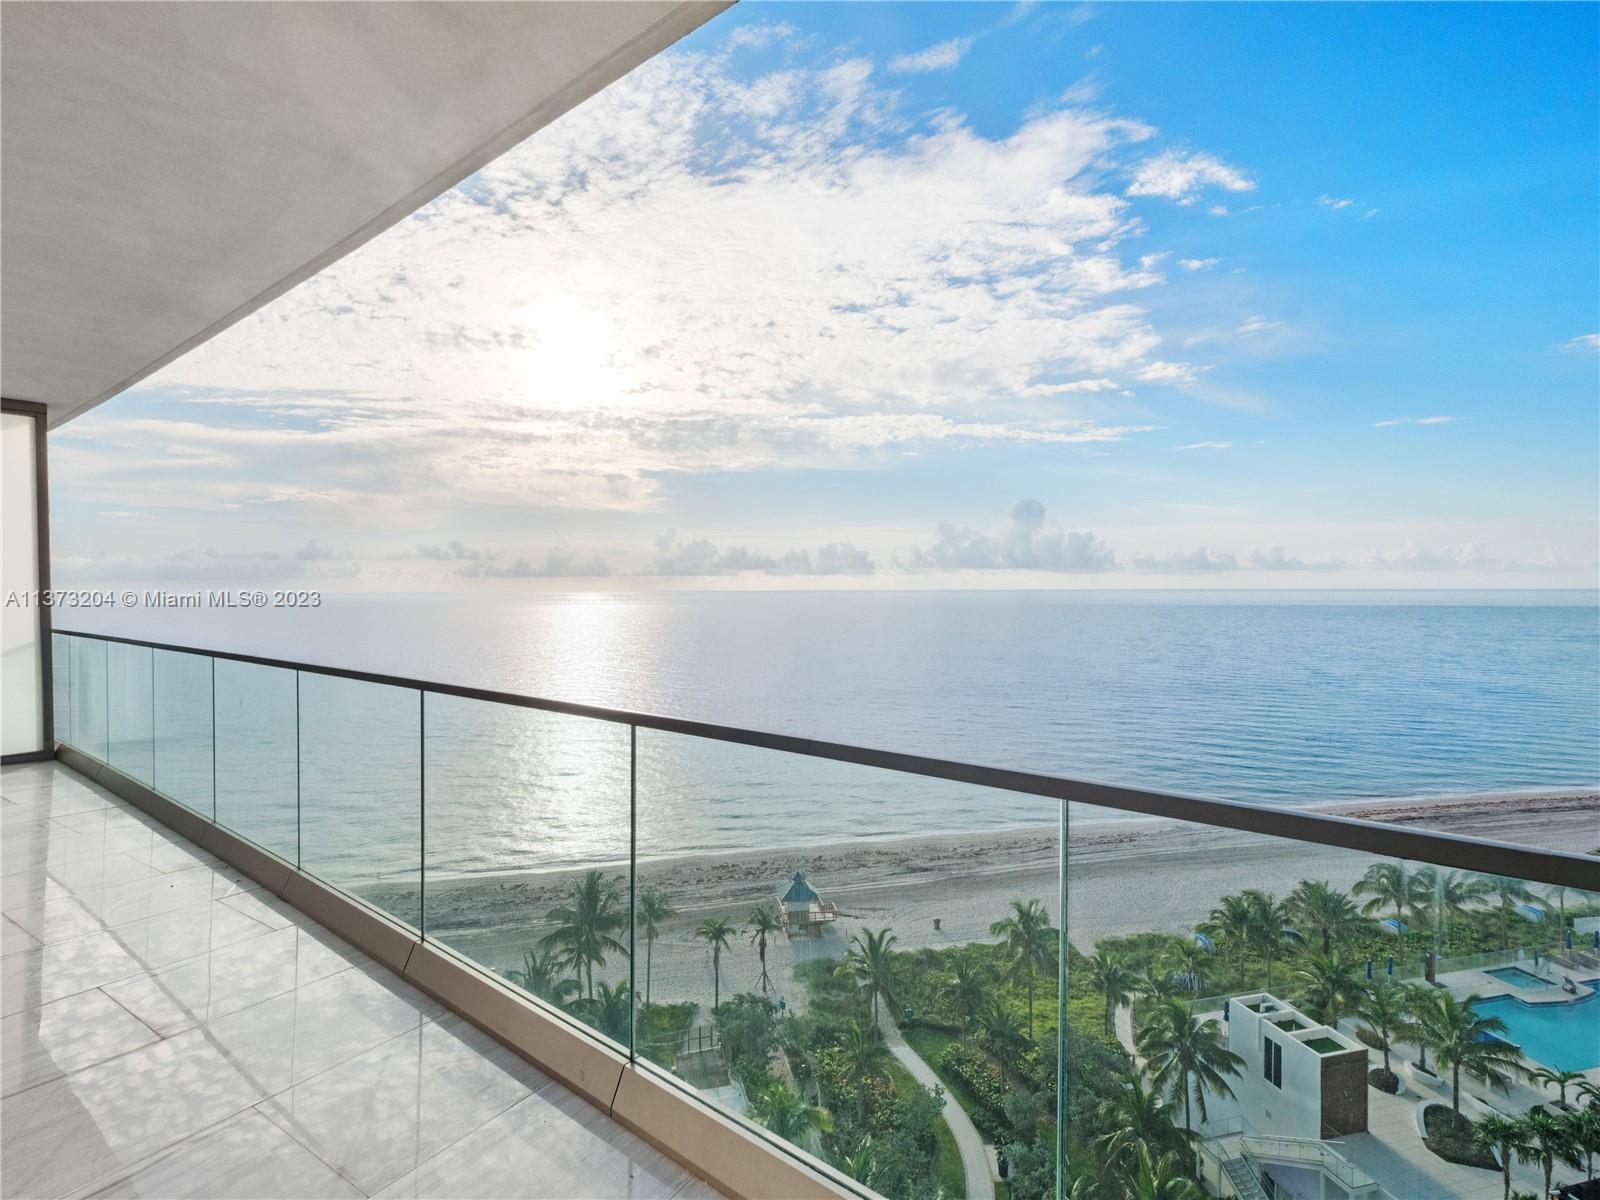 18975  Collins Ave #1004 For Sale A11373204, FL